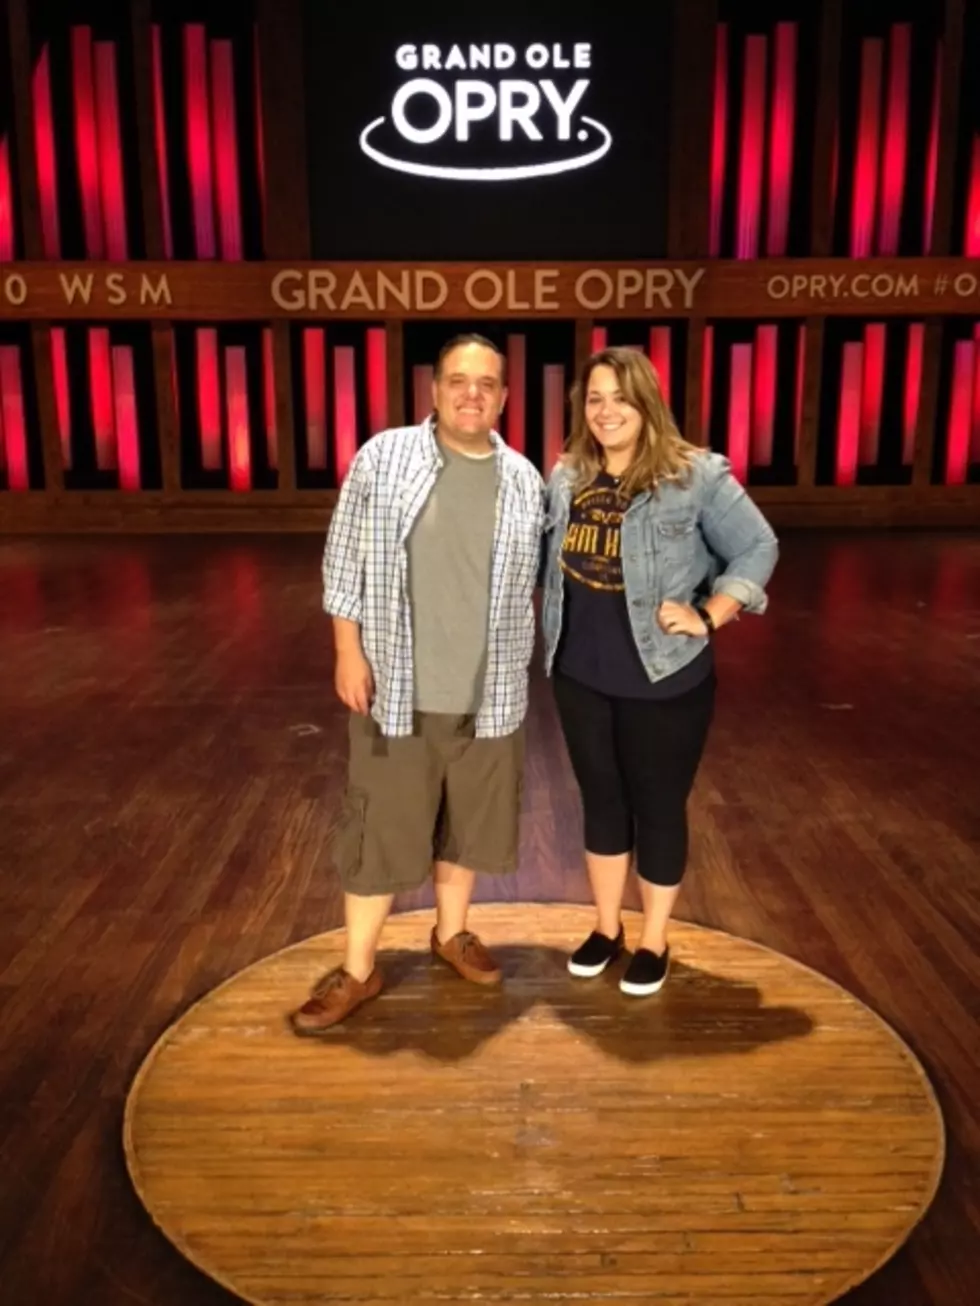 Take a Look at The Official Trailer for The Grand Ole Opry Movie